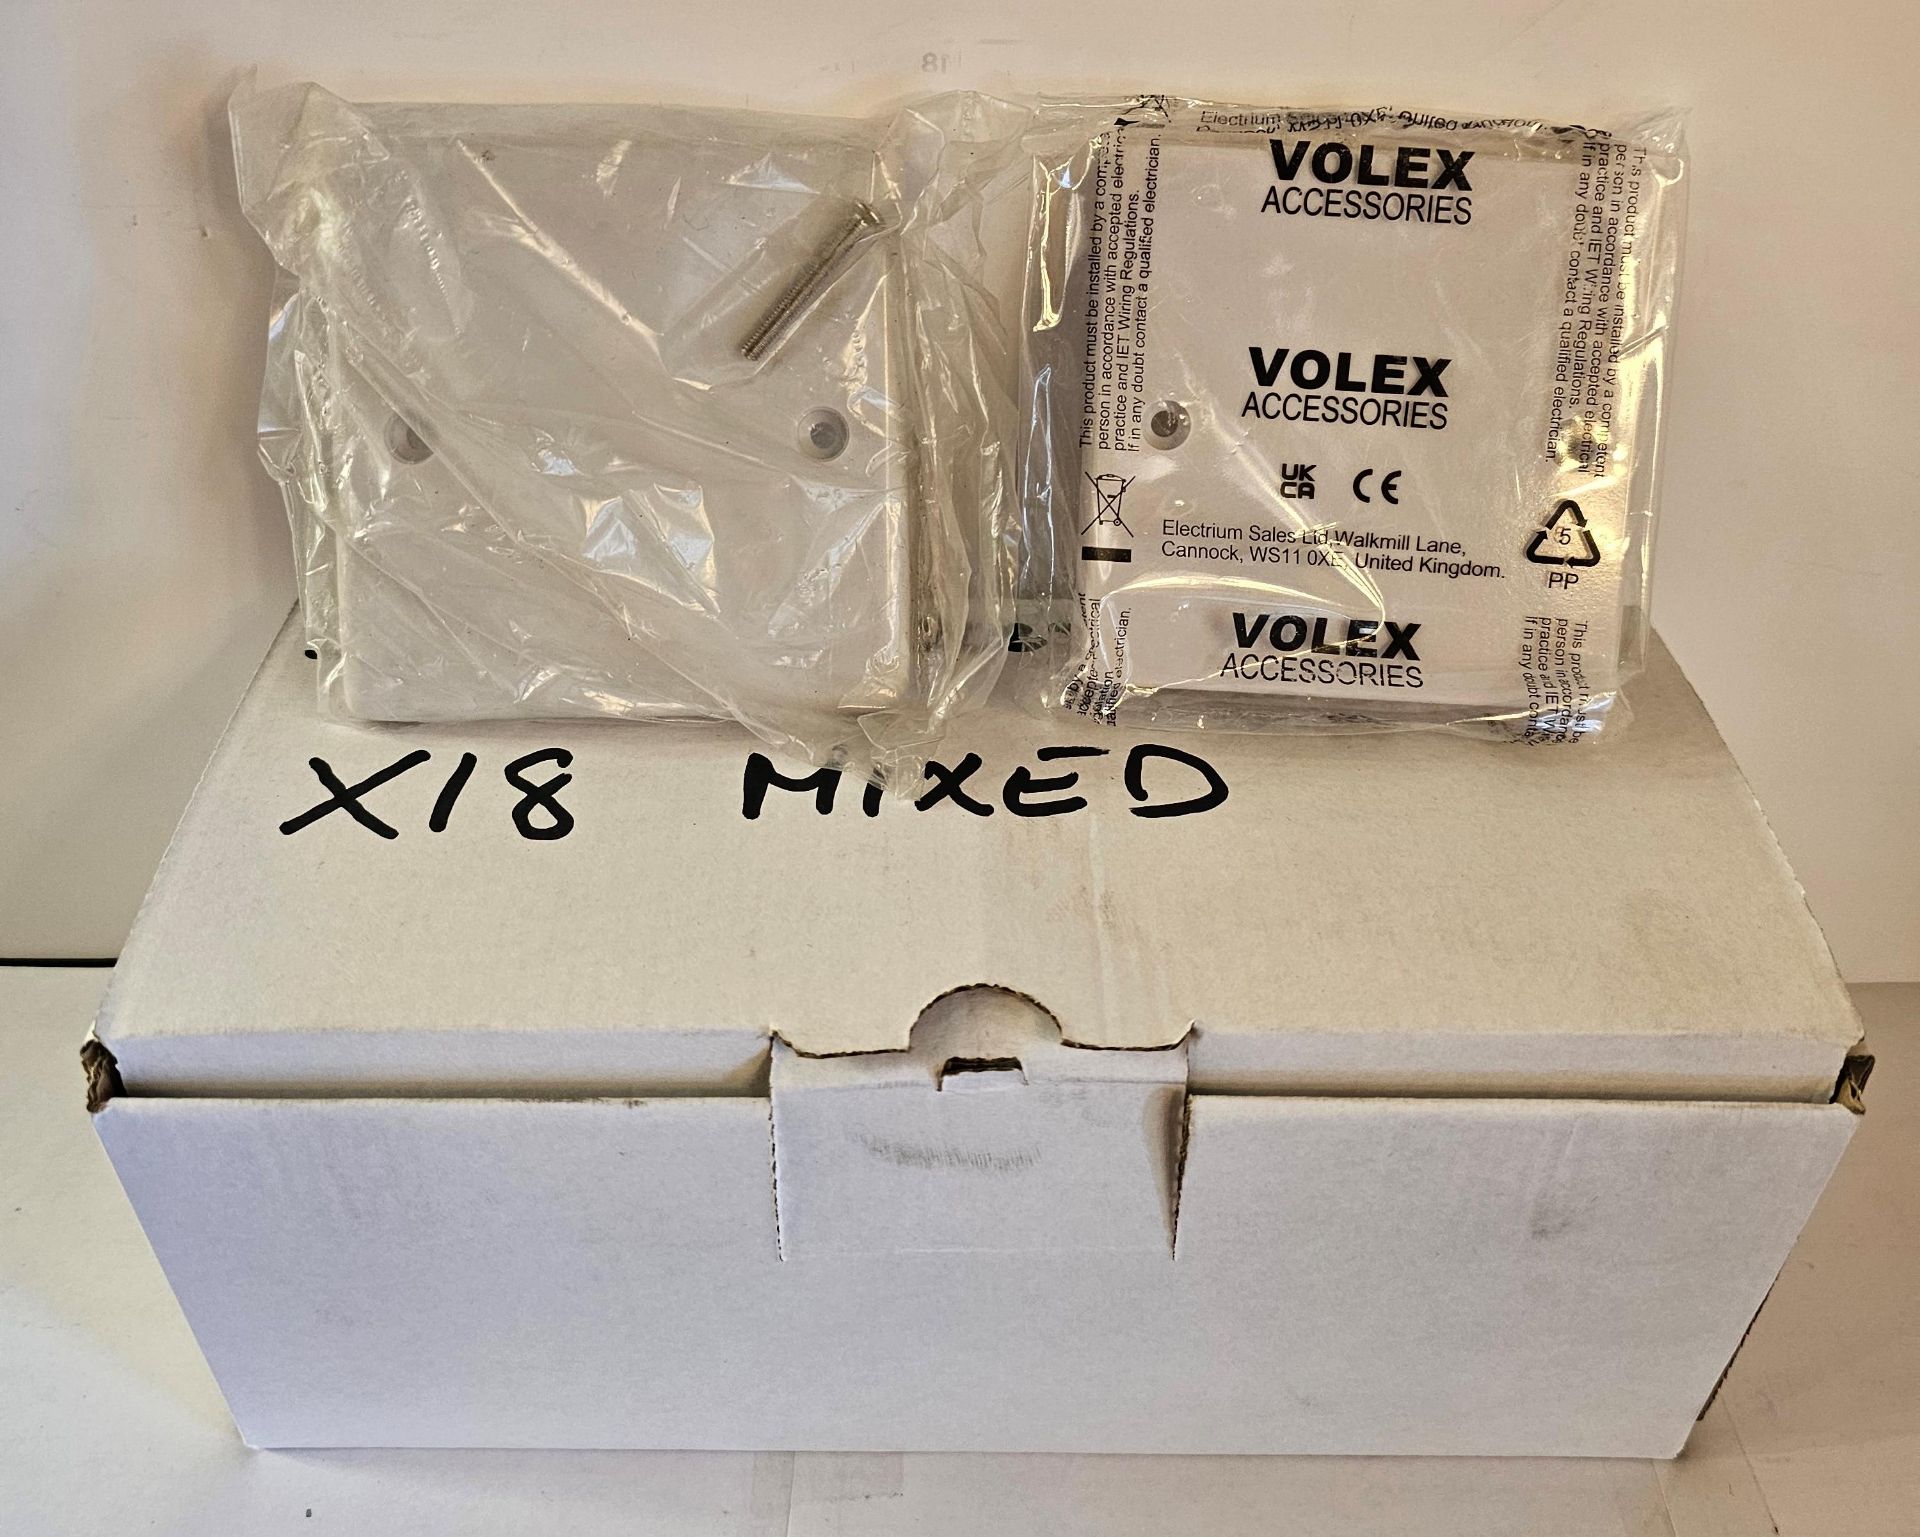 4 BOXES OF 1 GANG BLANK PLATES (VOLEX-DELTA-CRABTREE)